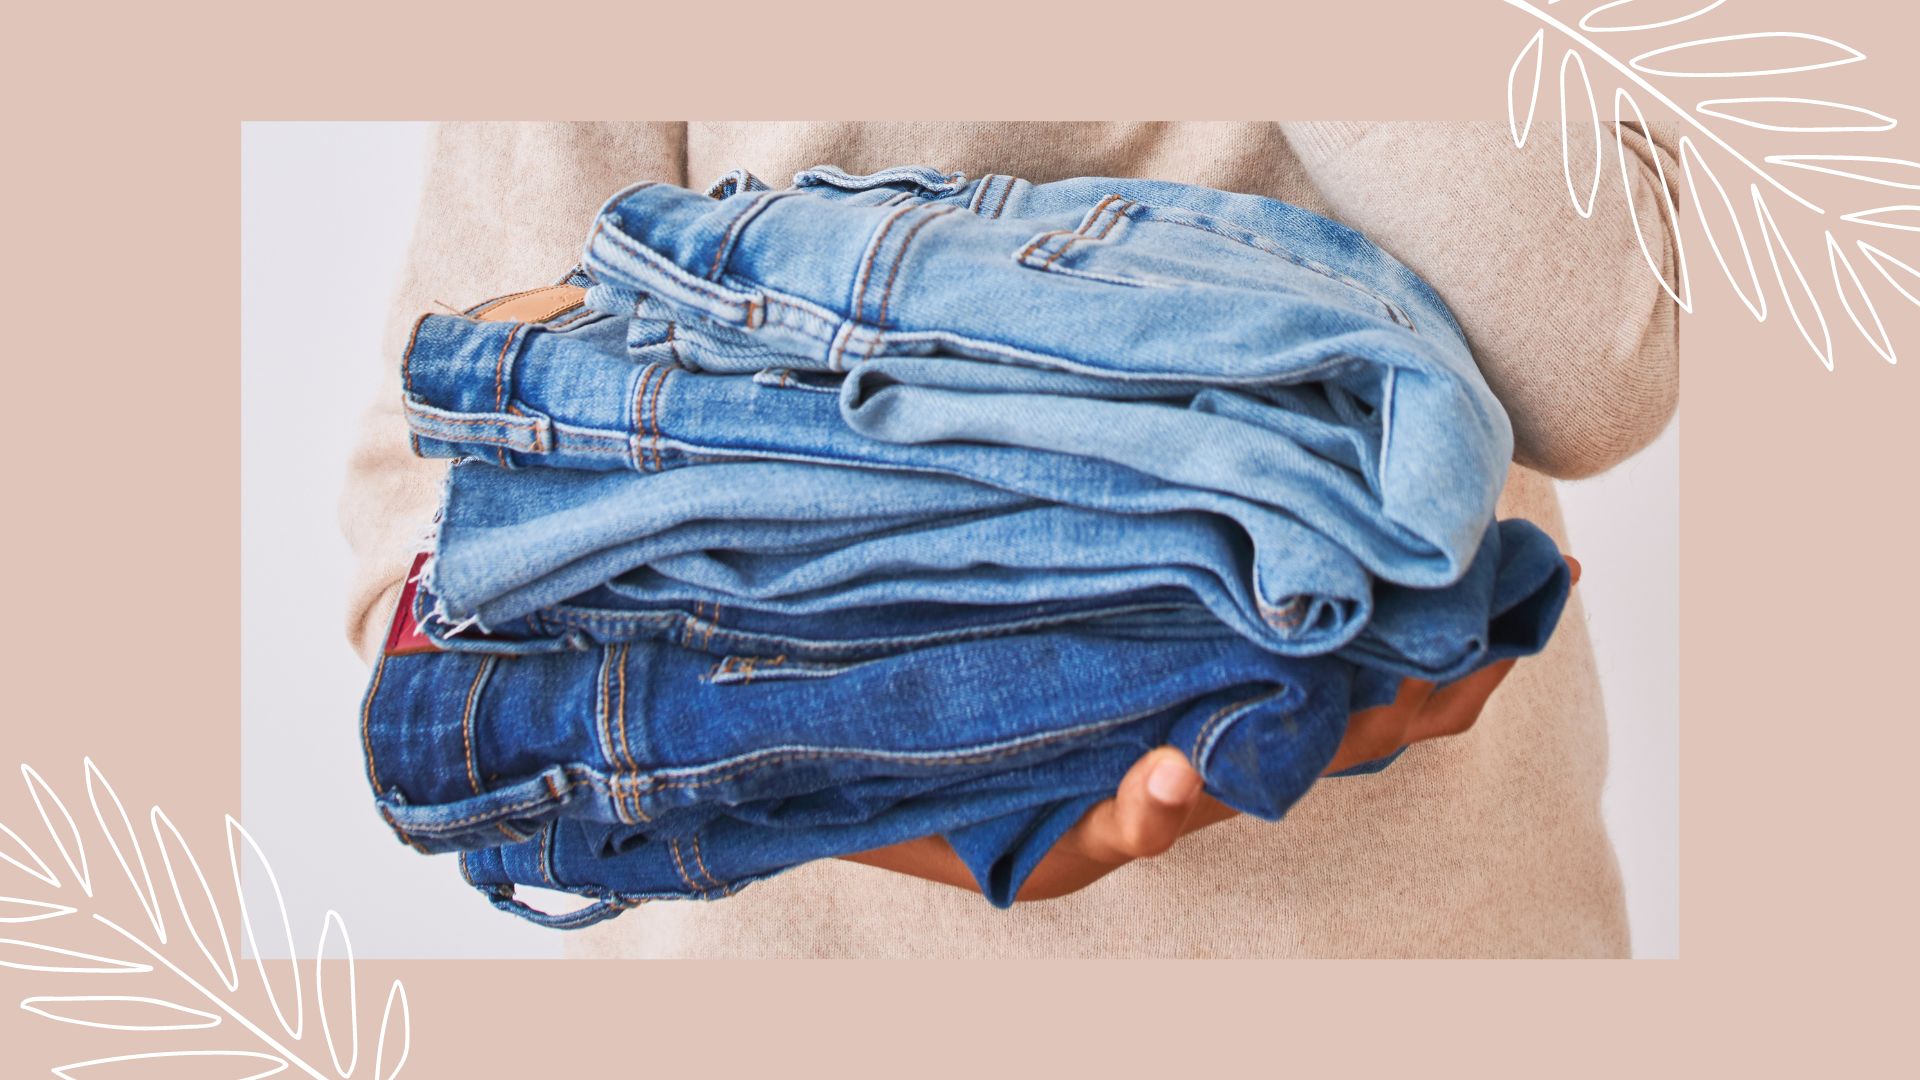 Can jeans be washed at 40 degrees?